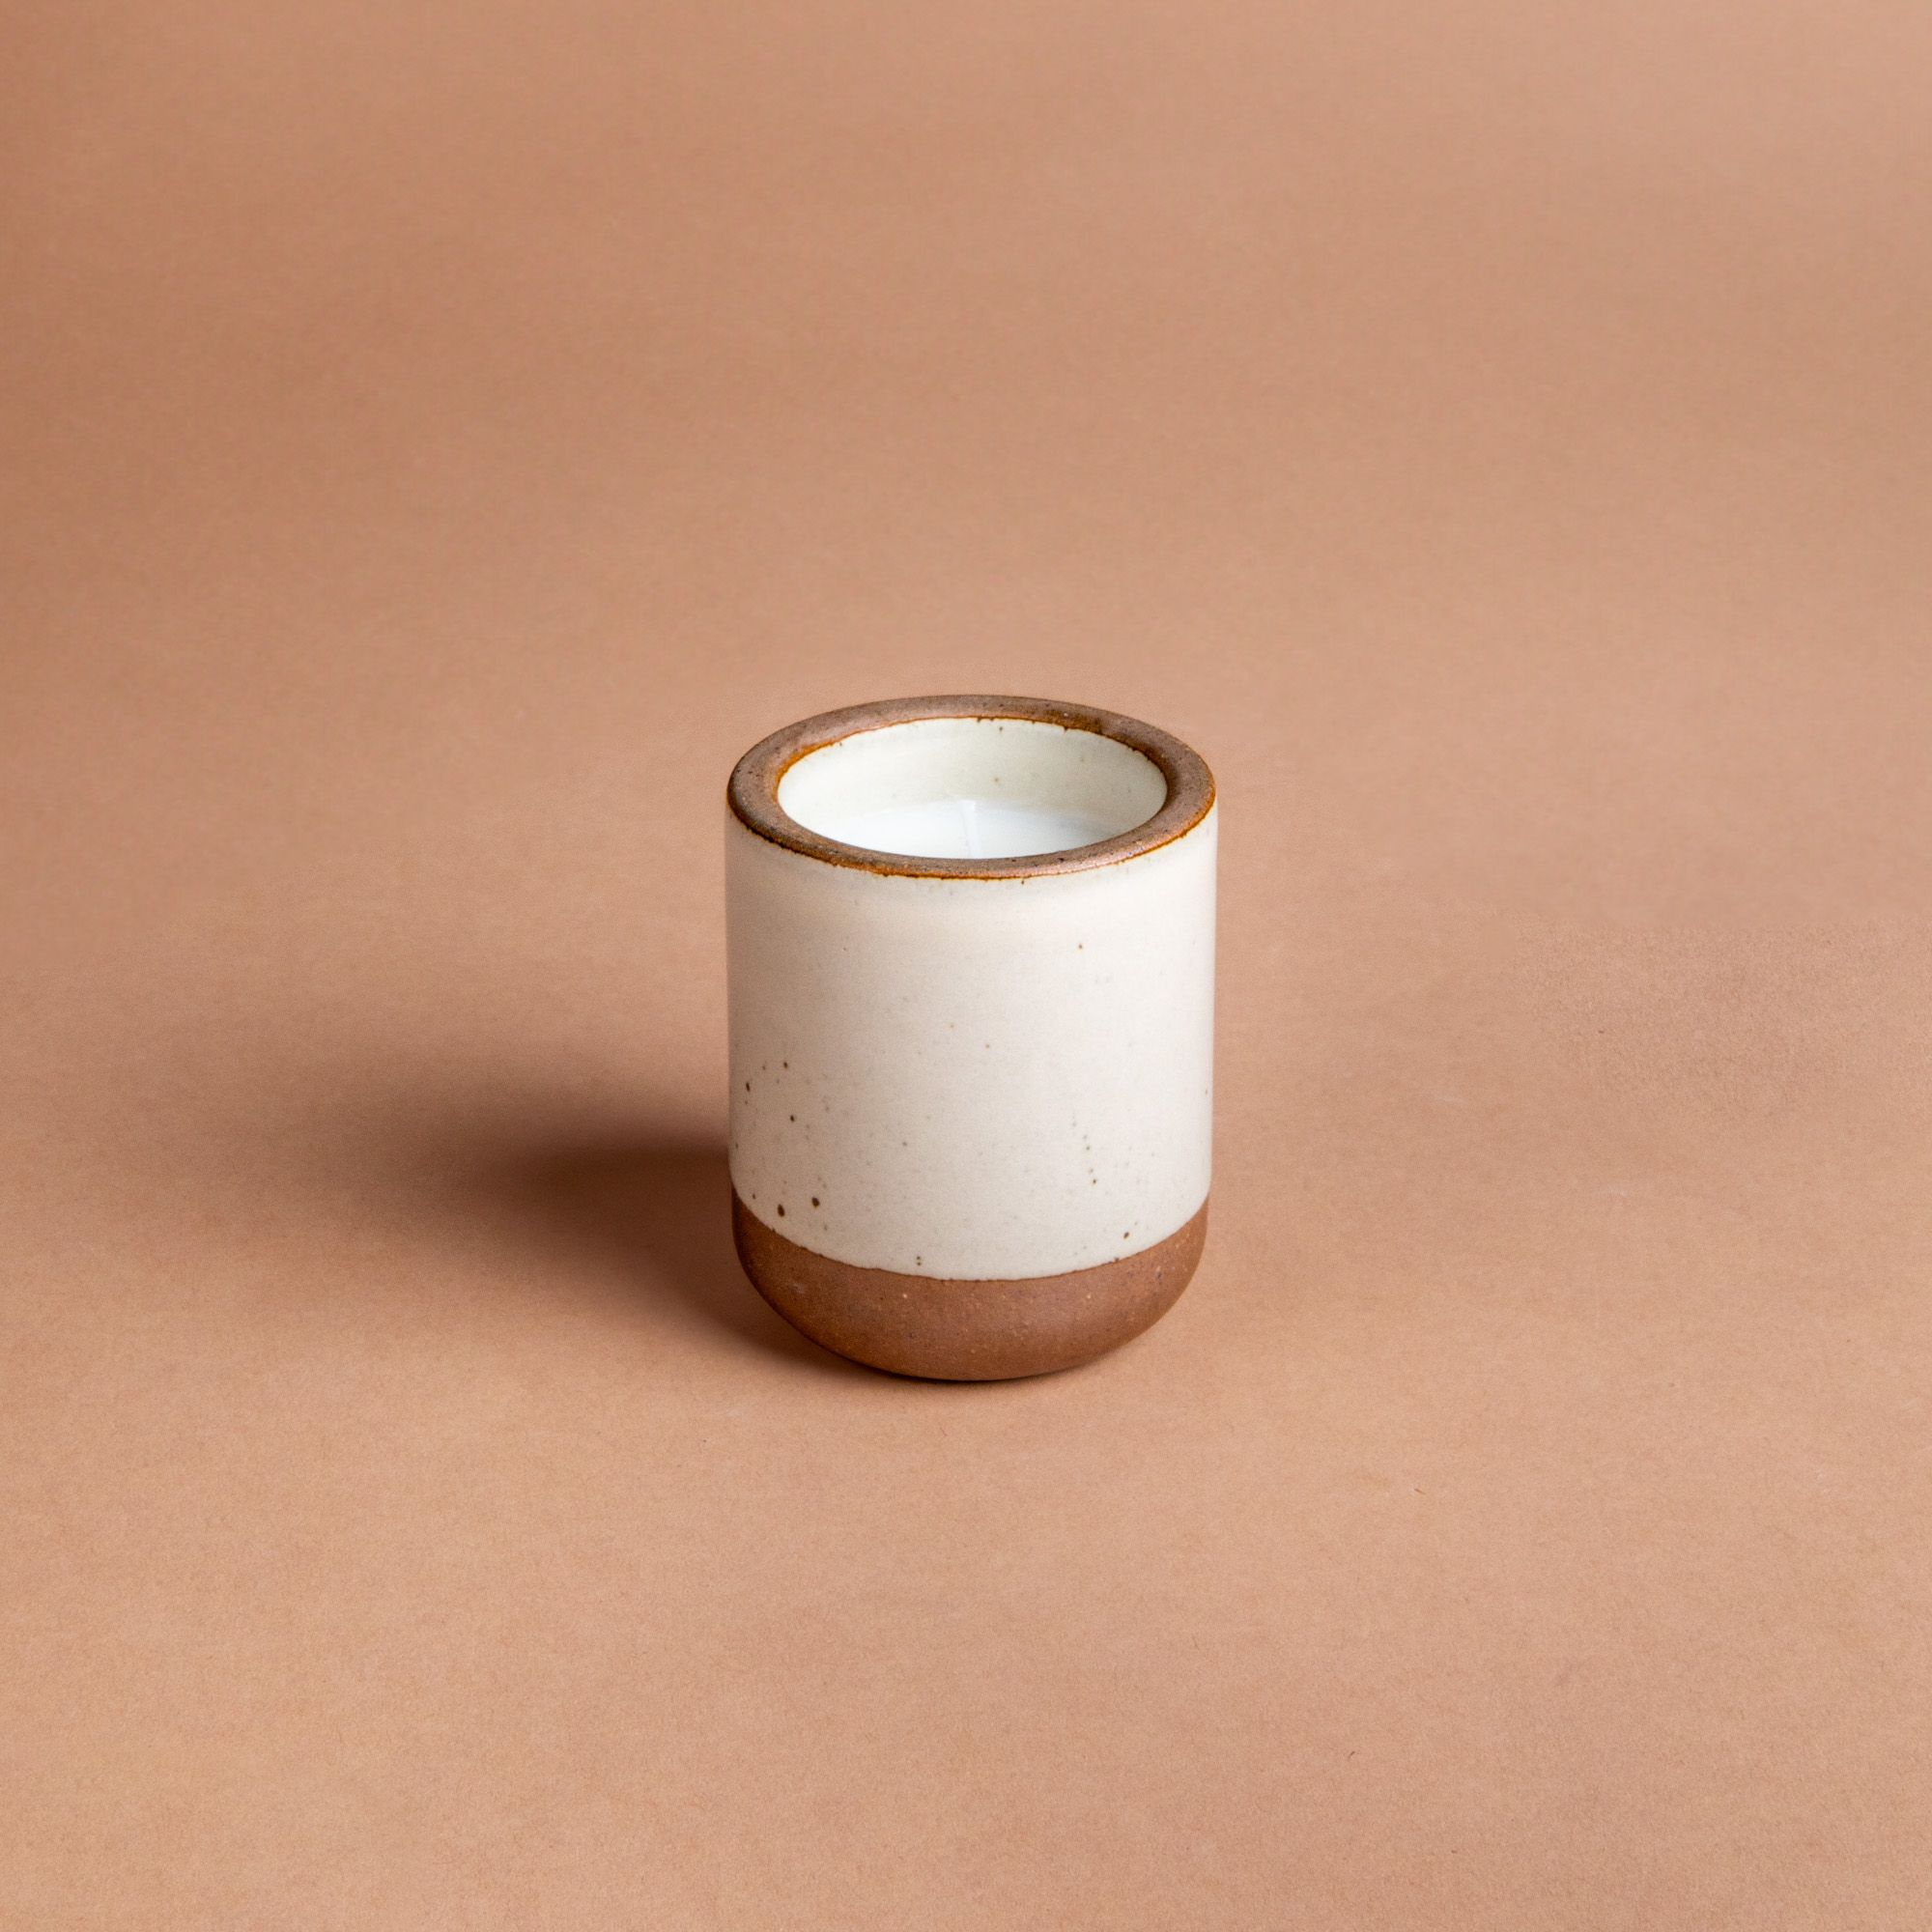 Small ceramic vessel in a warm off-white color with candle inside.